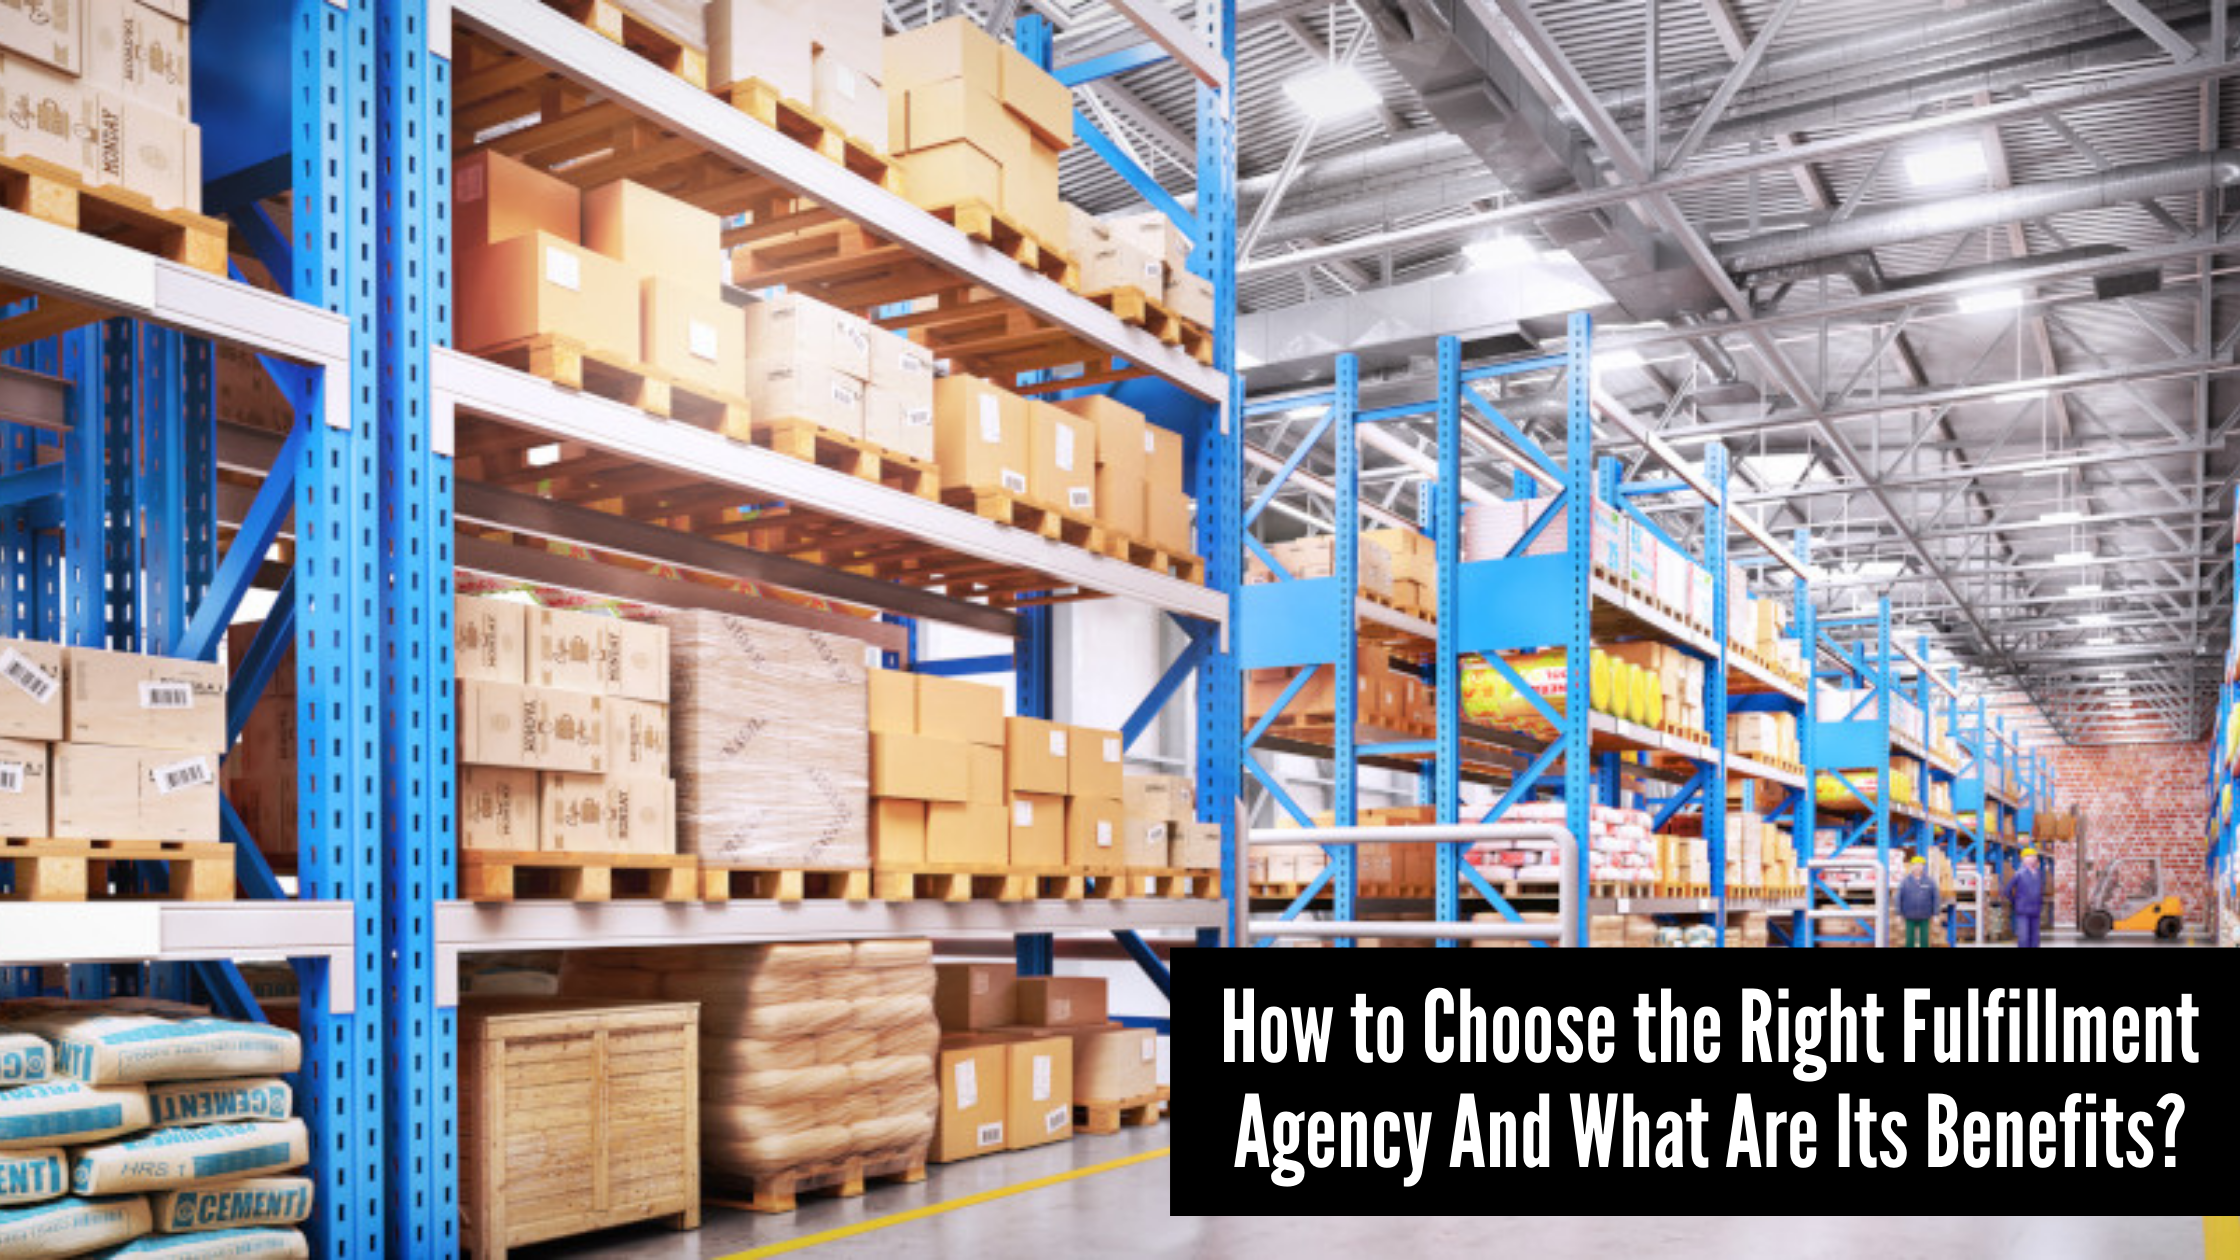 How to Choose the Right Fulfillment Agency And What Are Its Benefits?